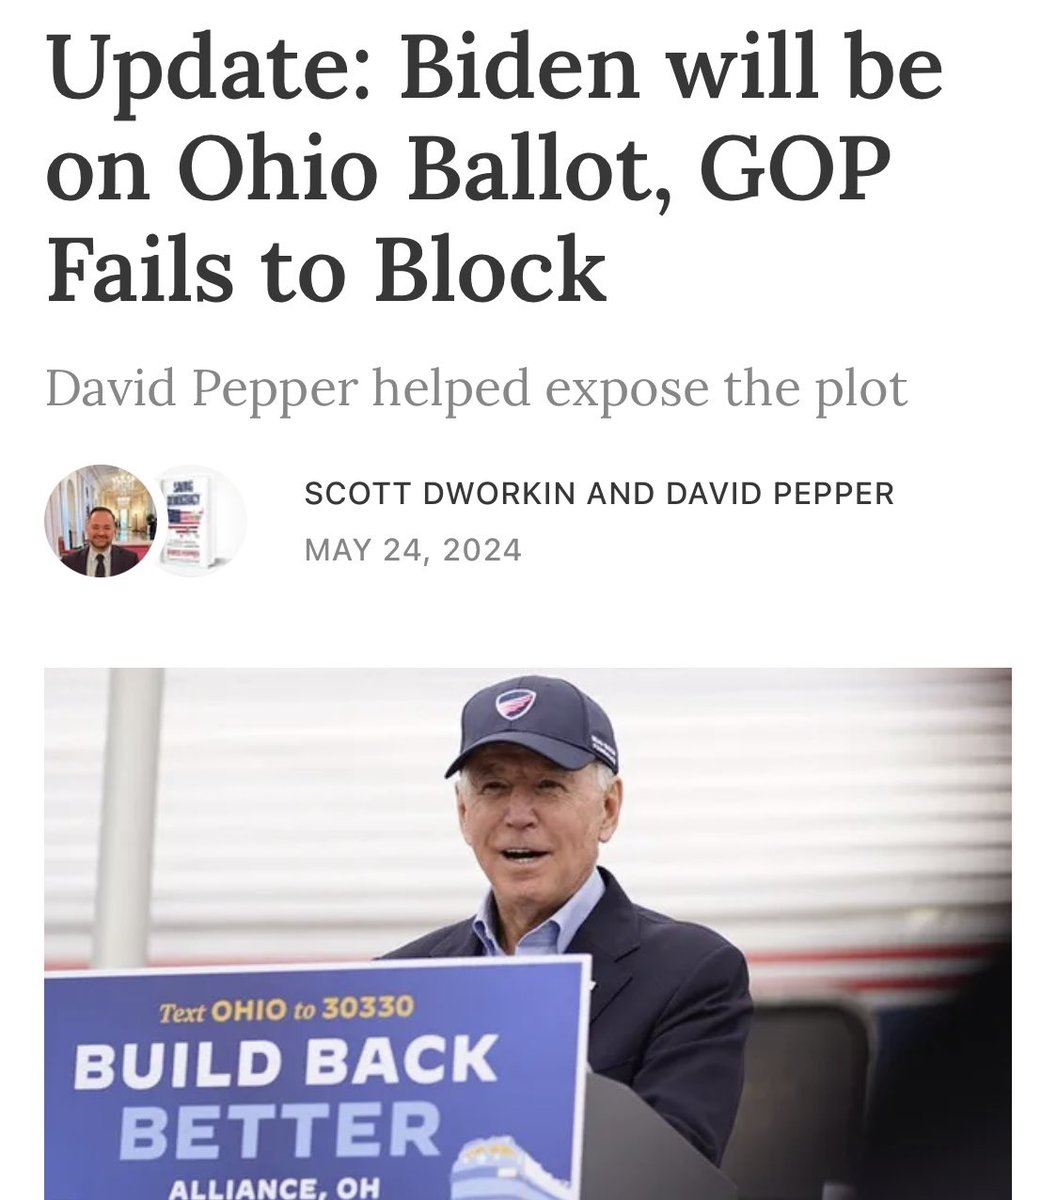 Update: Biden will be on Ohio Ballot, GOP fails to block. Thanks to everyone for calling out this nonsense. Read the exclusive here: dworkinsubstack.com/p/gop-exposed-…